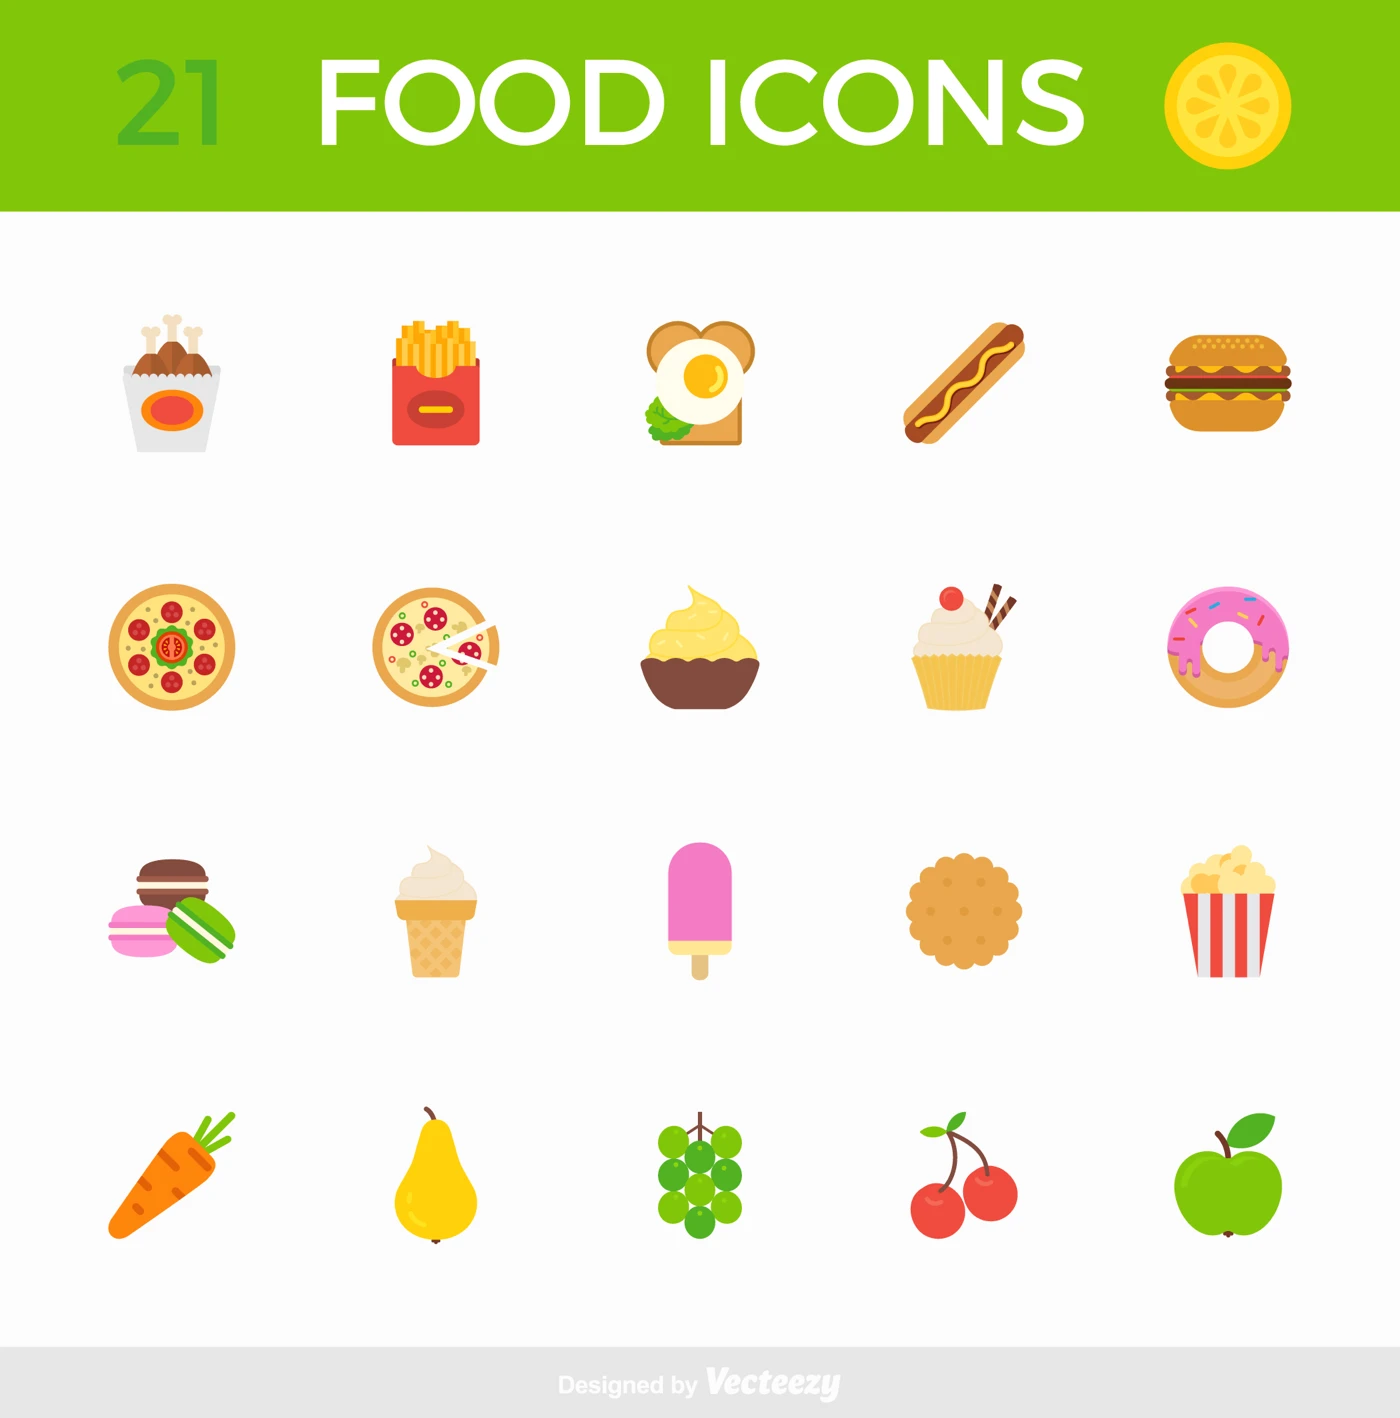 Tasty Food Free Icon Pack - 21 free, tasty food icons for your next product design project